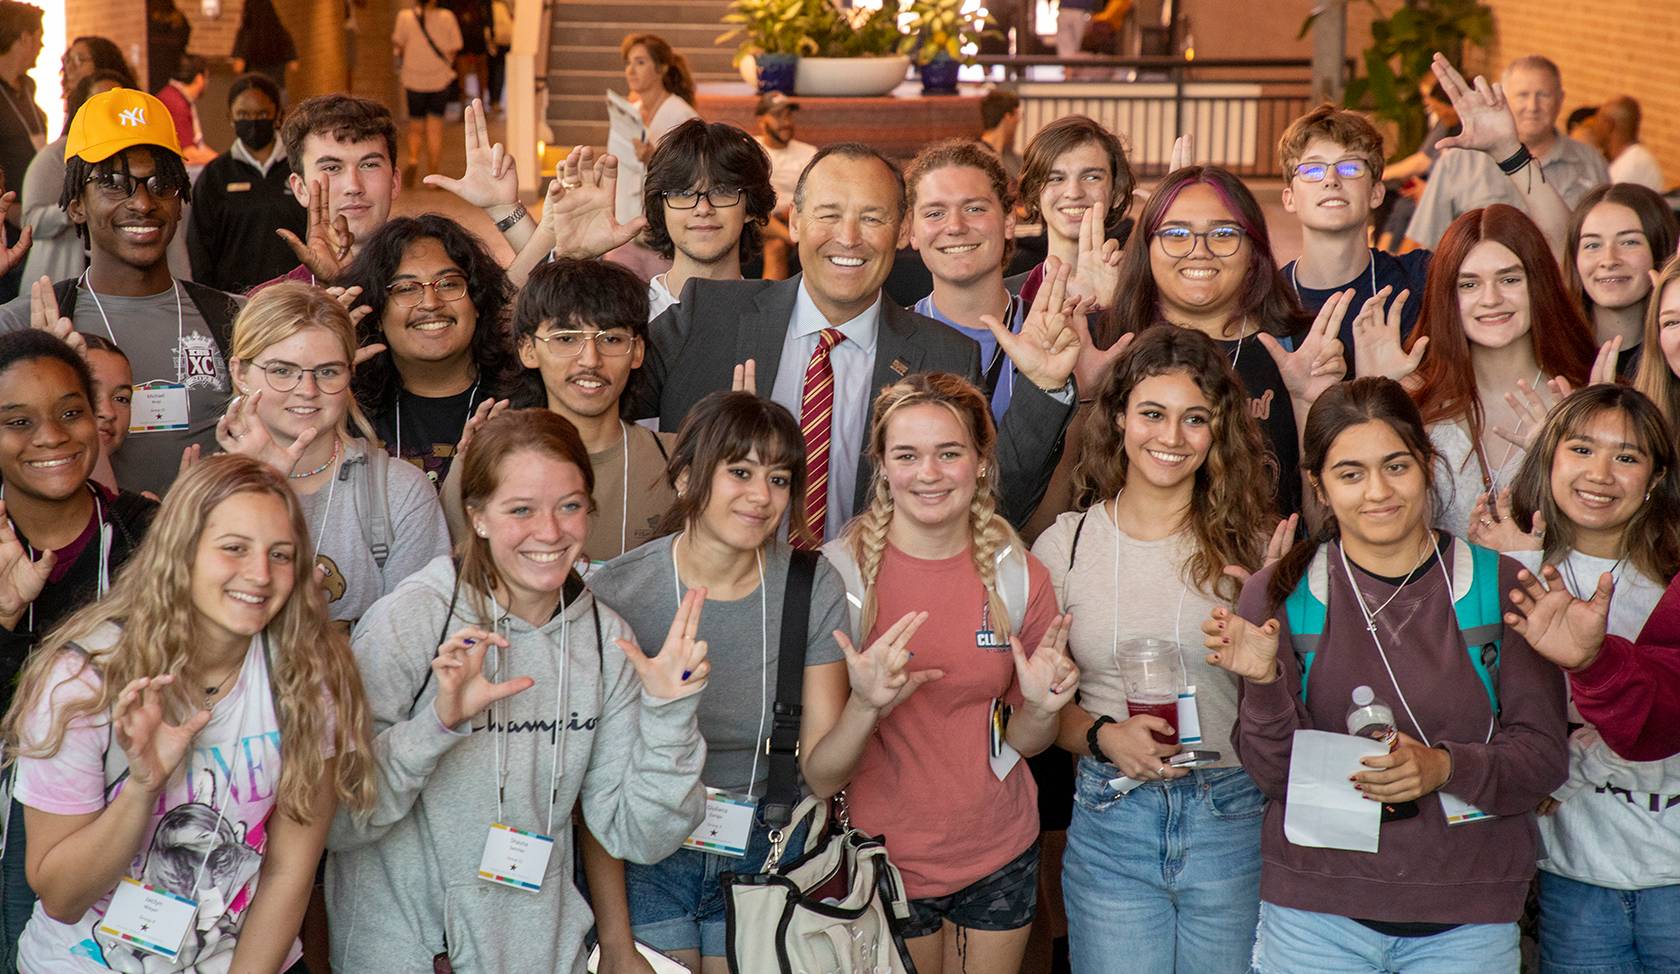 President Damphousse smiling with a group of students